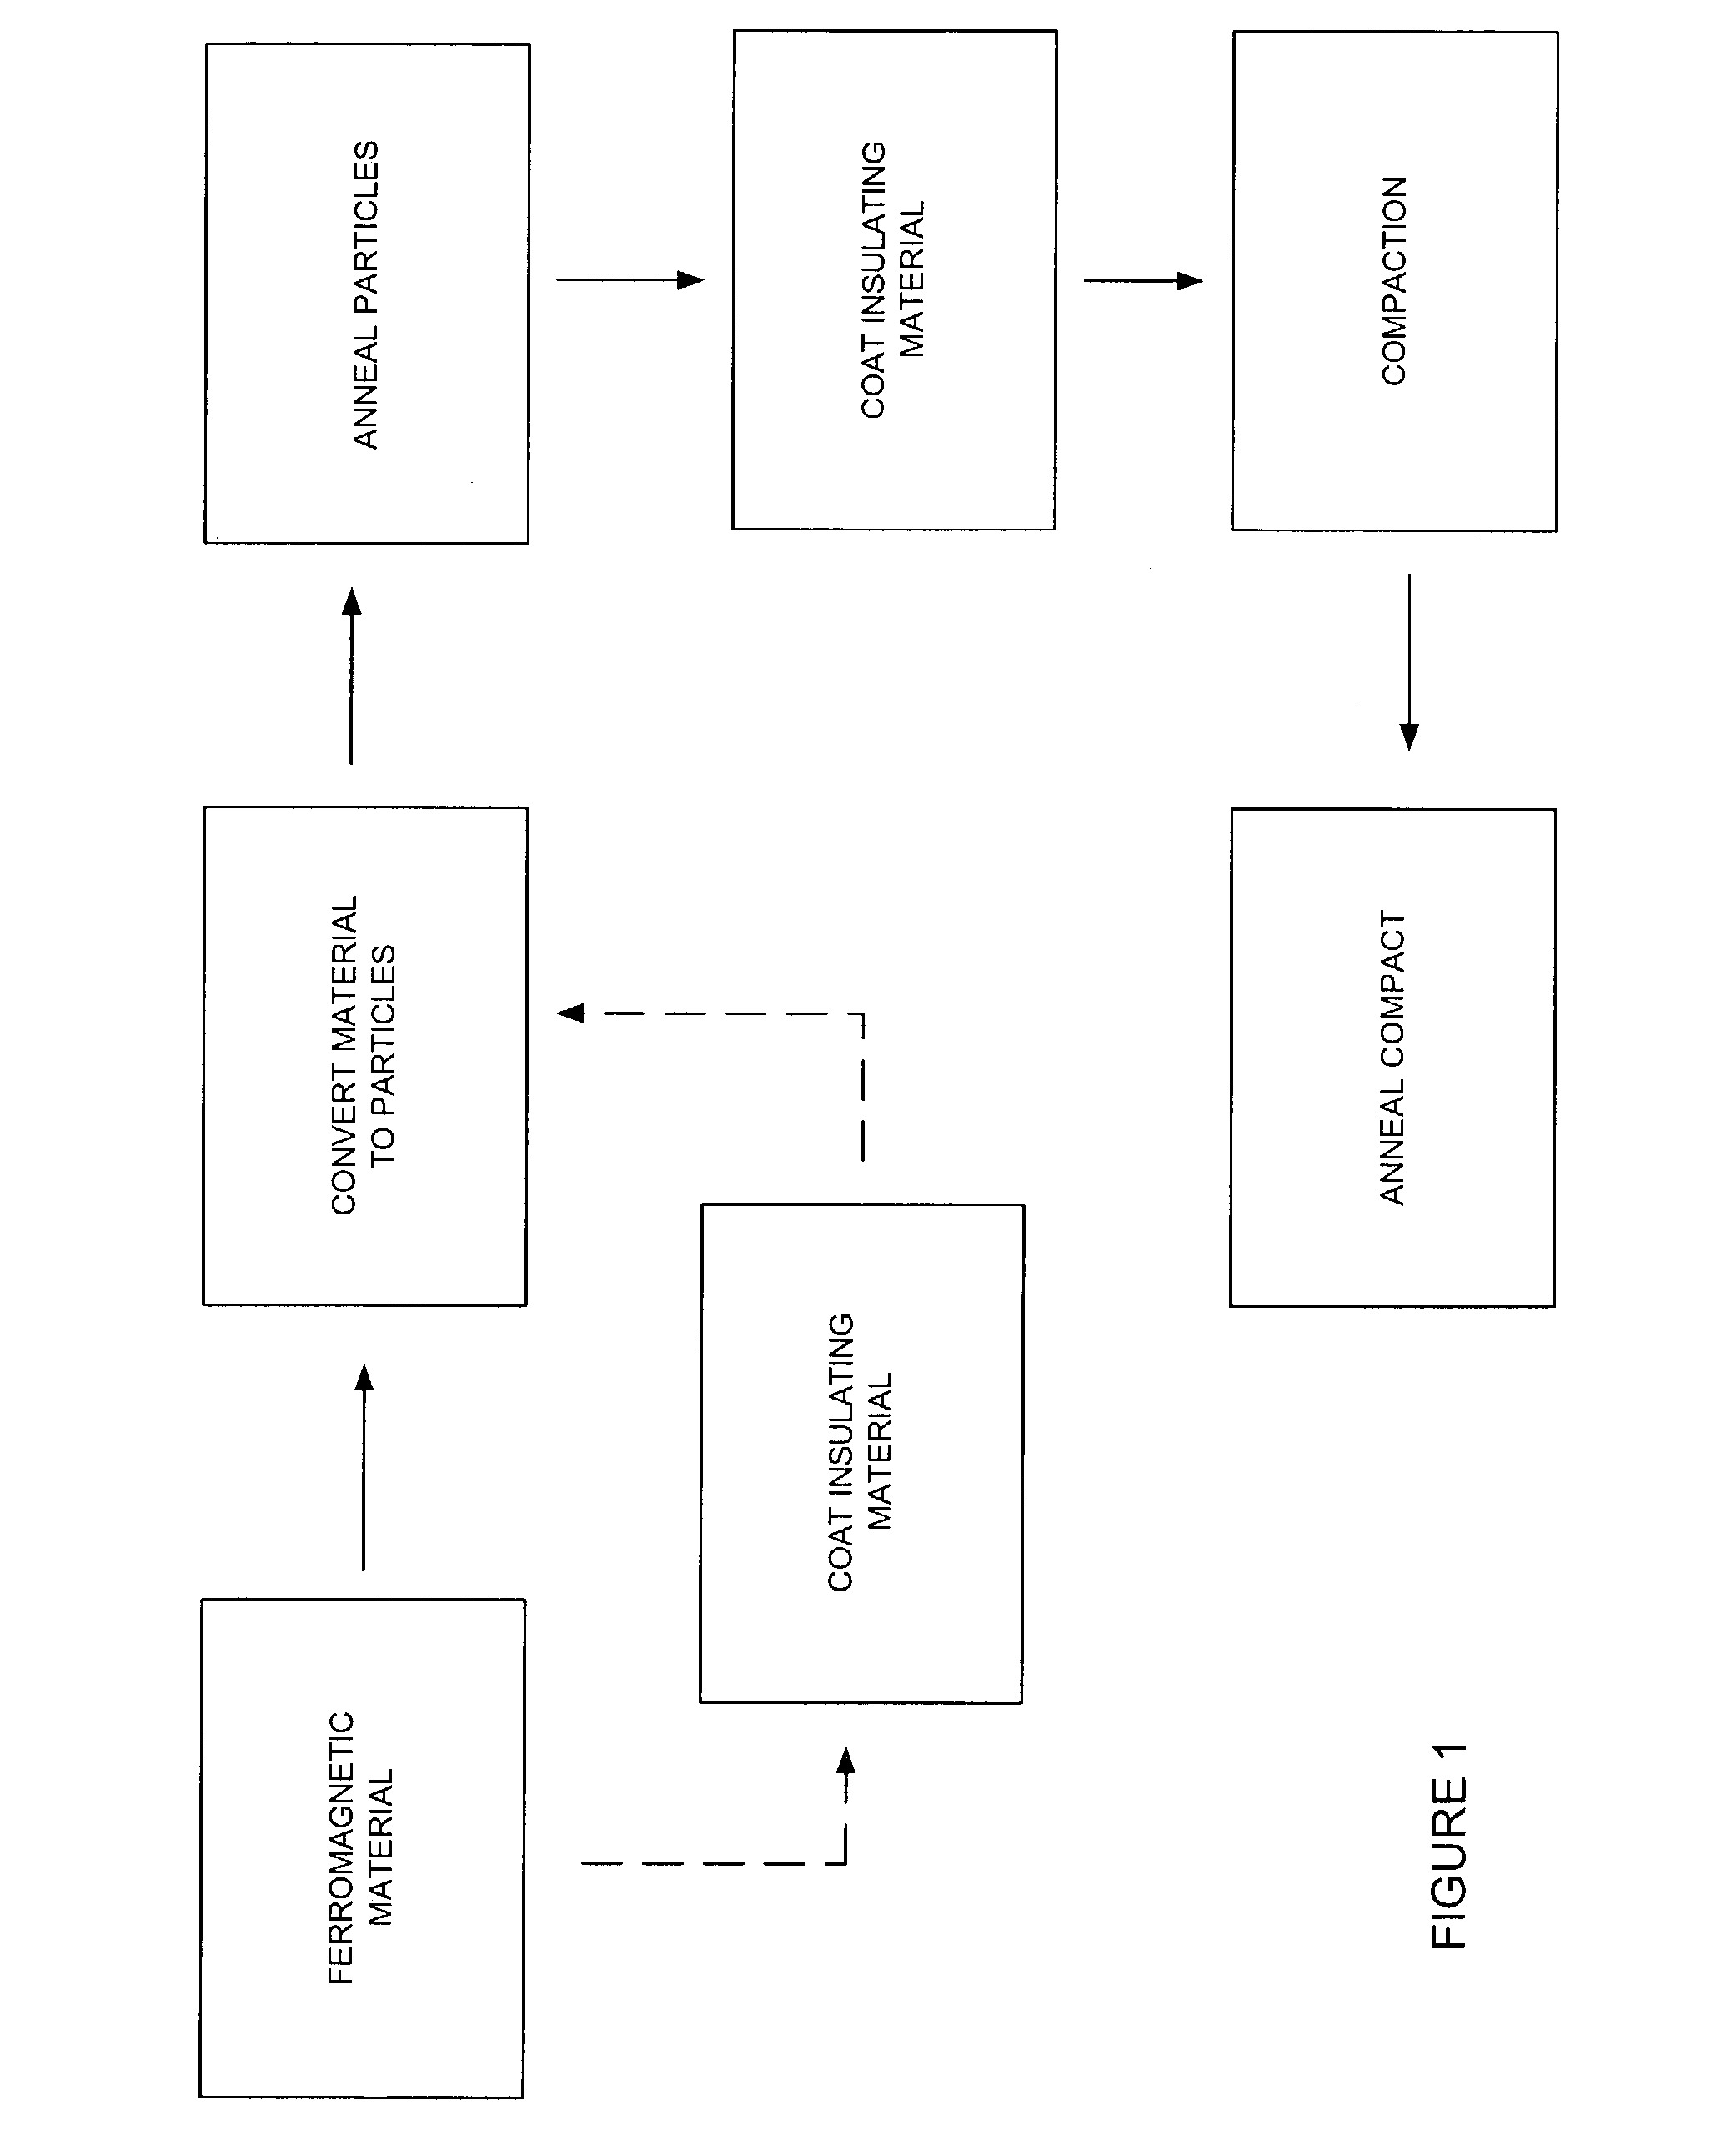 Coated ferromagnetic particles and compositions containing the same